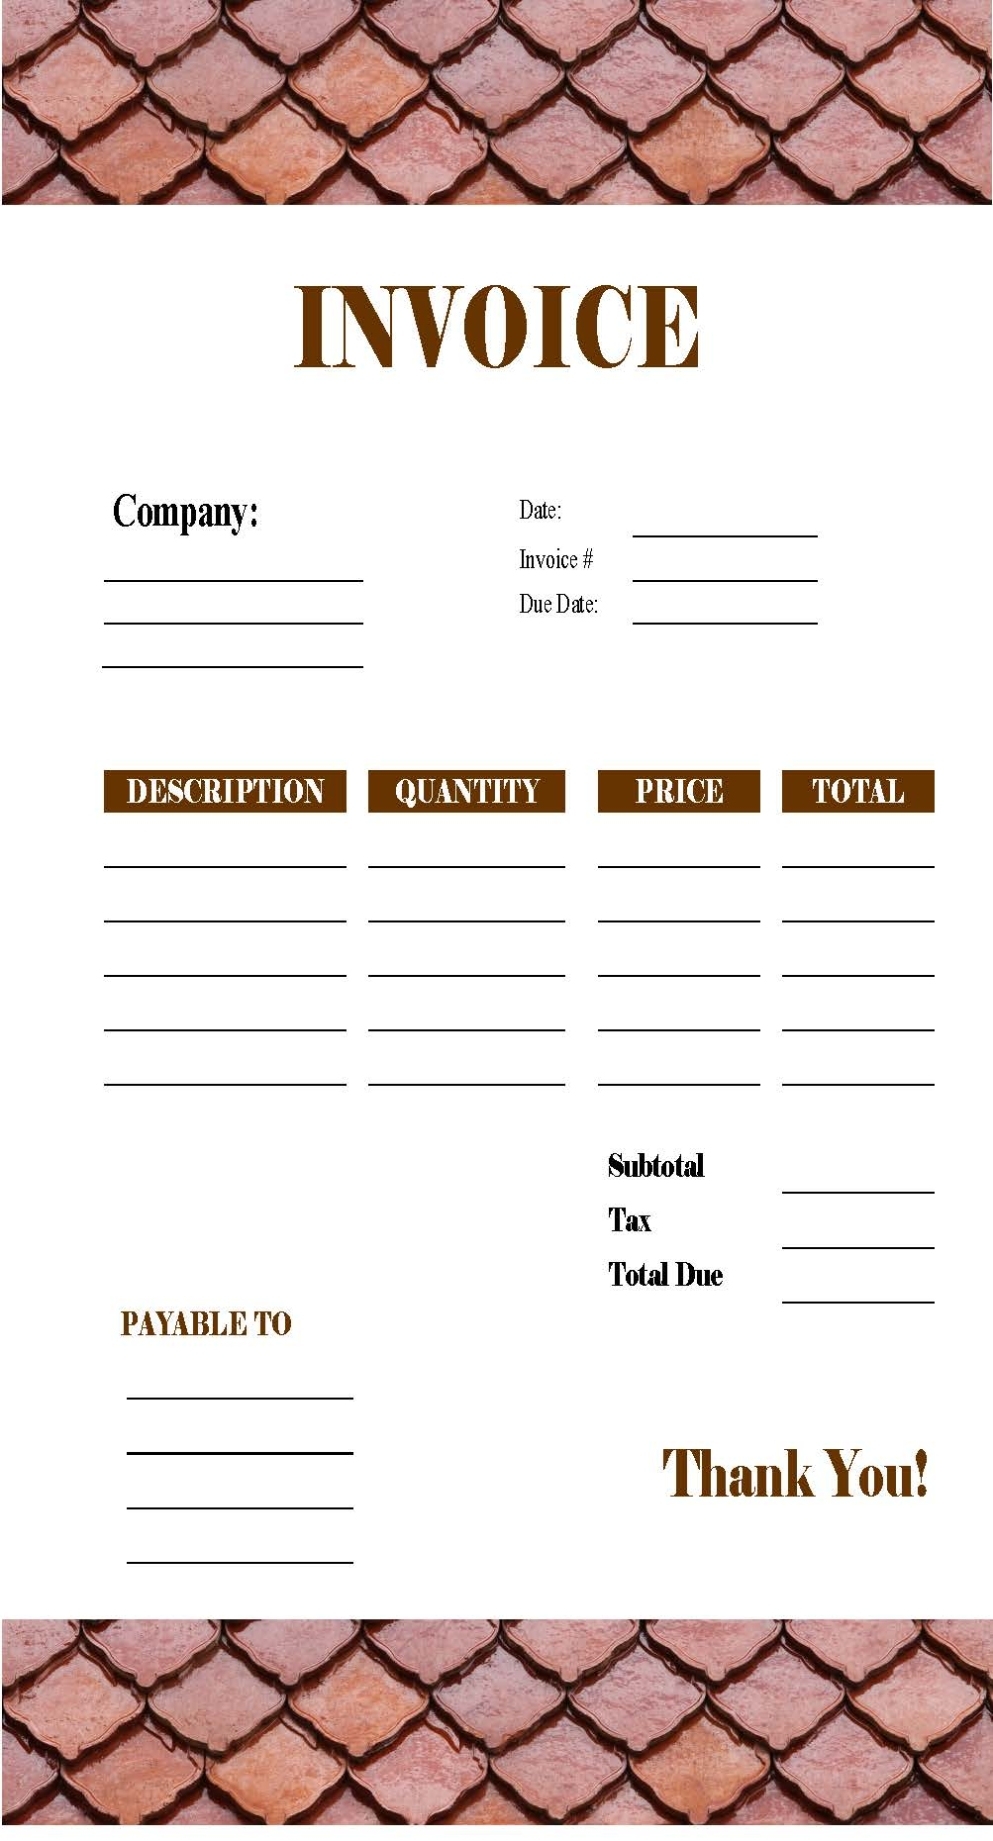 Free Invoice Templates & Online Invoice Maker Regarding Free Roofing Invoice Template